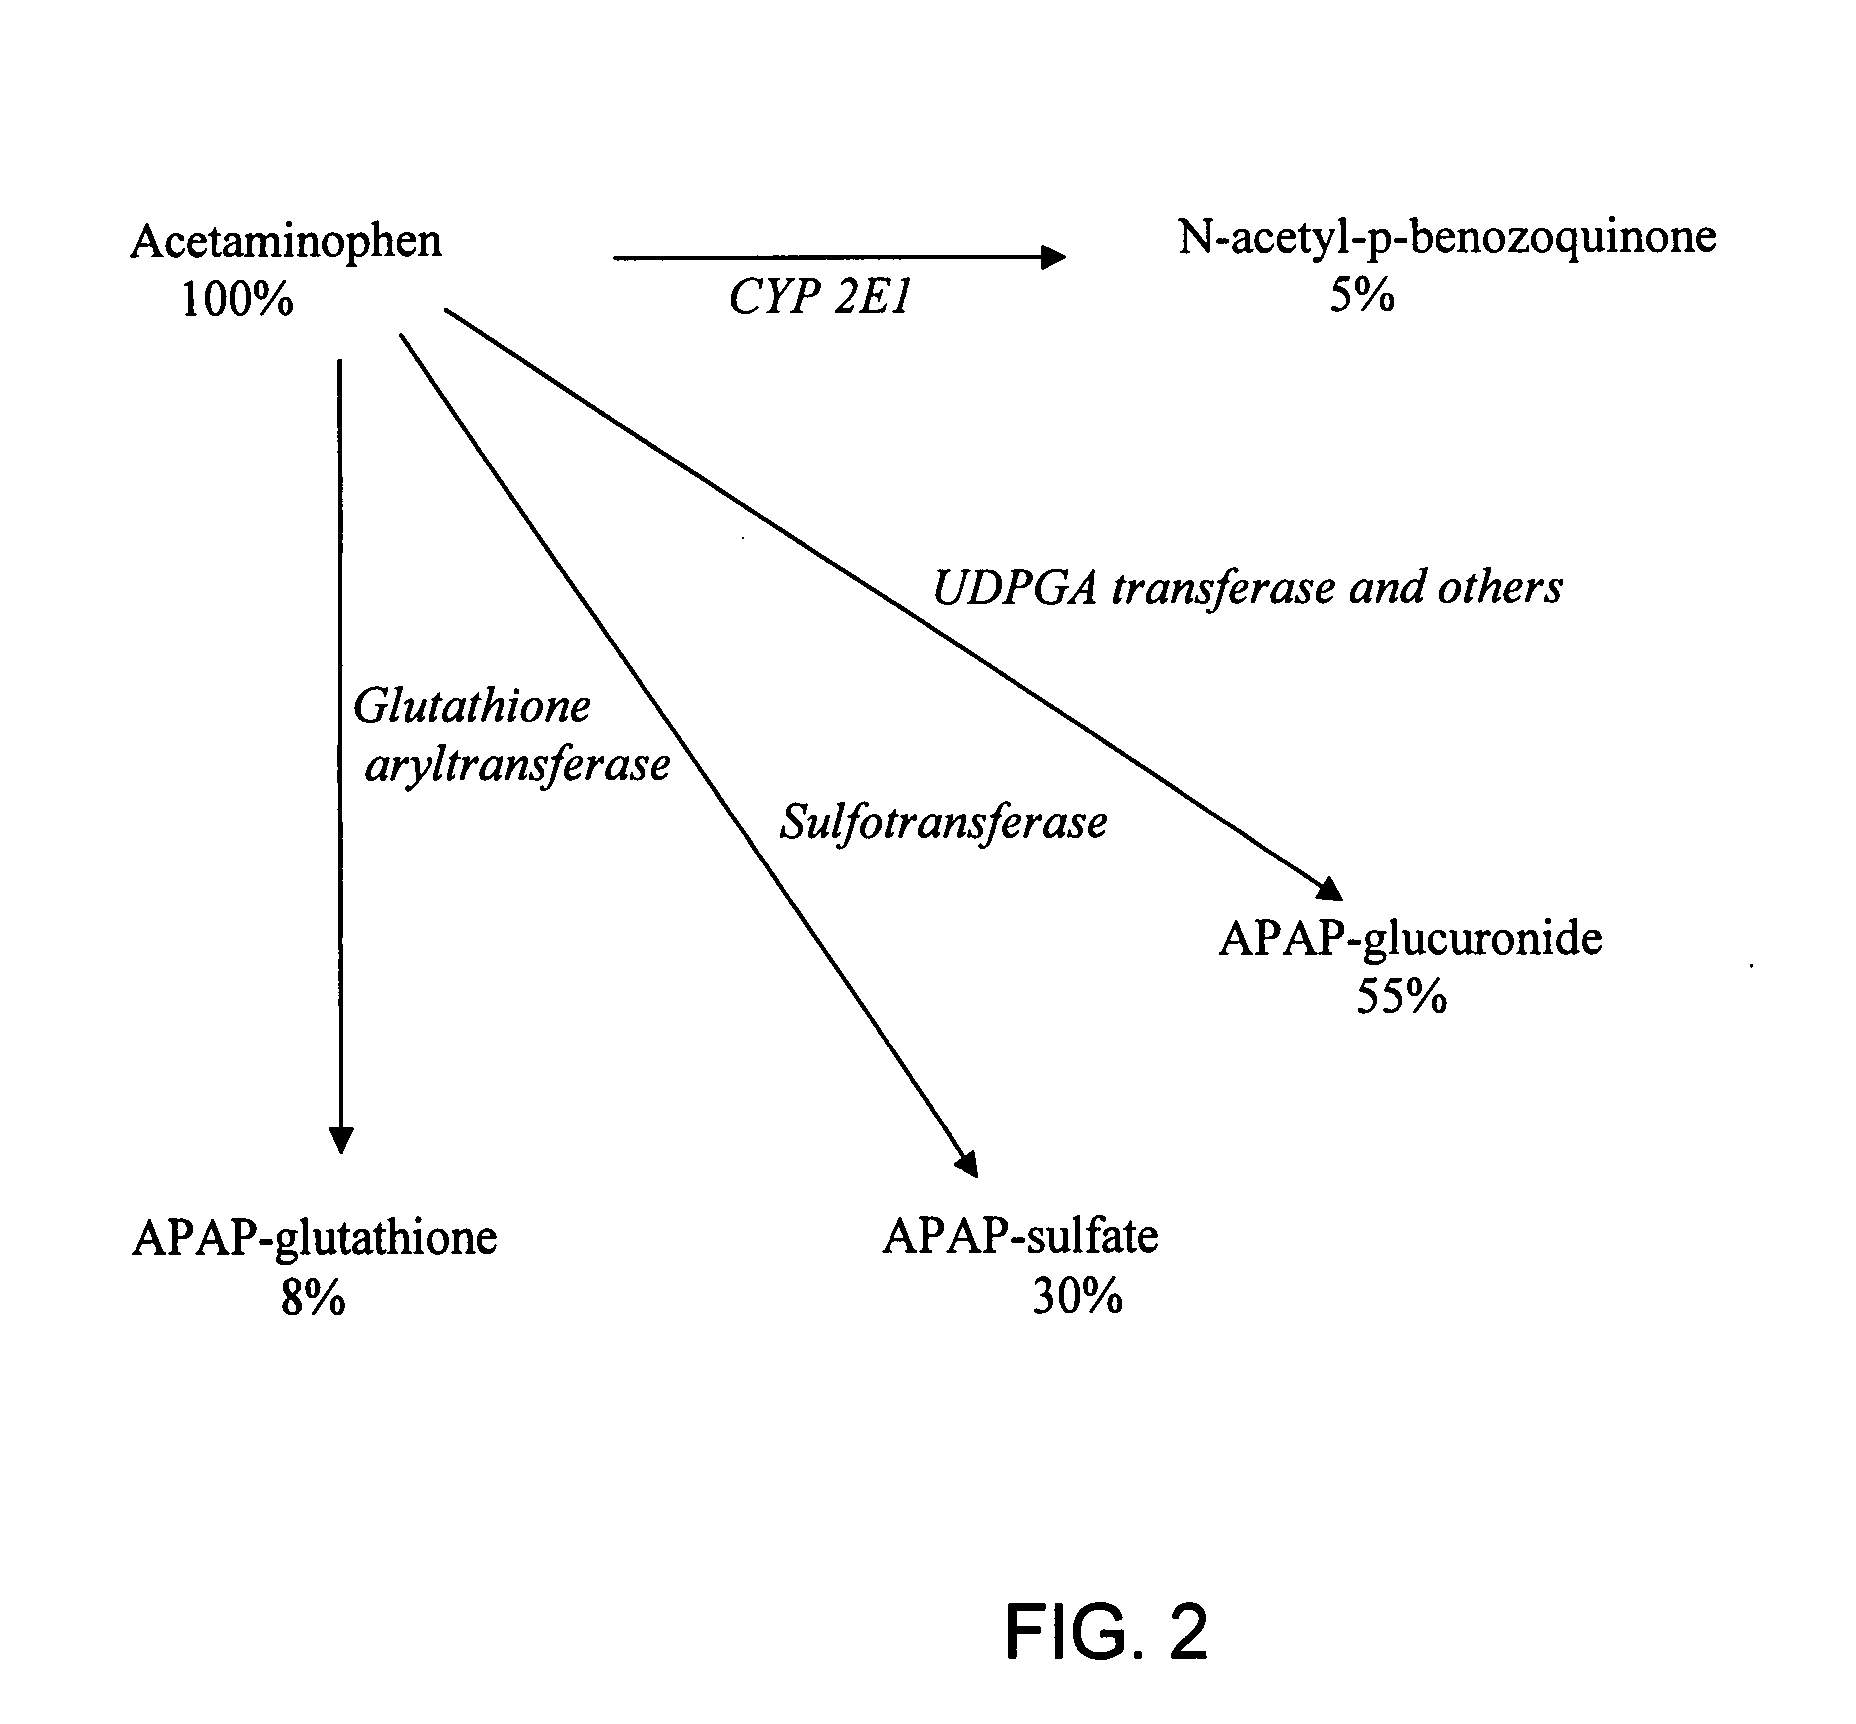 Directed metabolism of compounds by glucuronidation and sulfonation donors to decrease toxicity